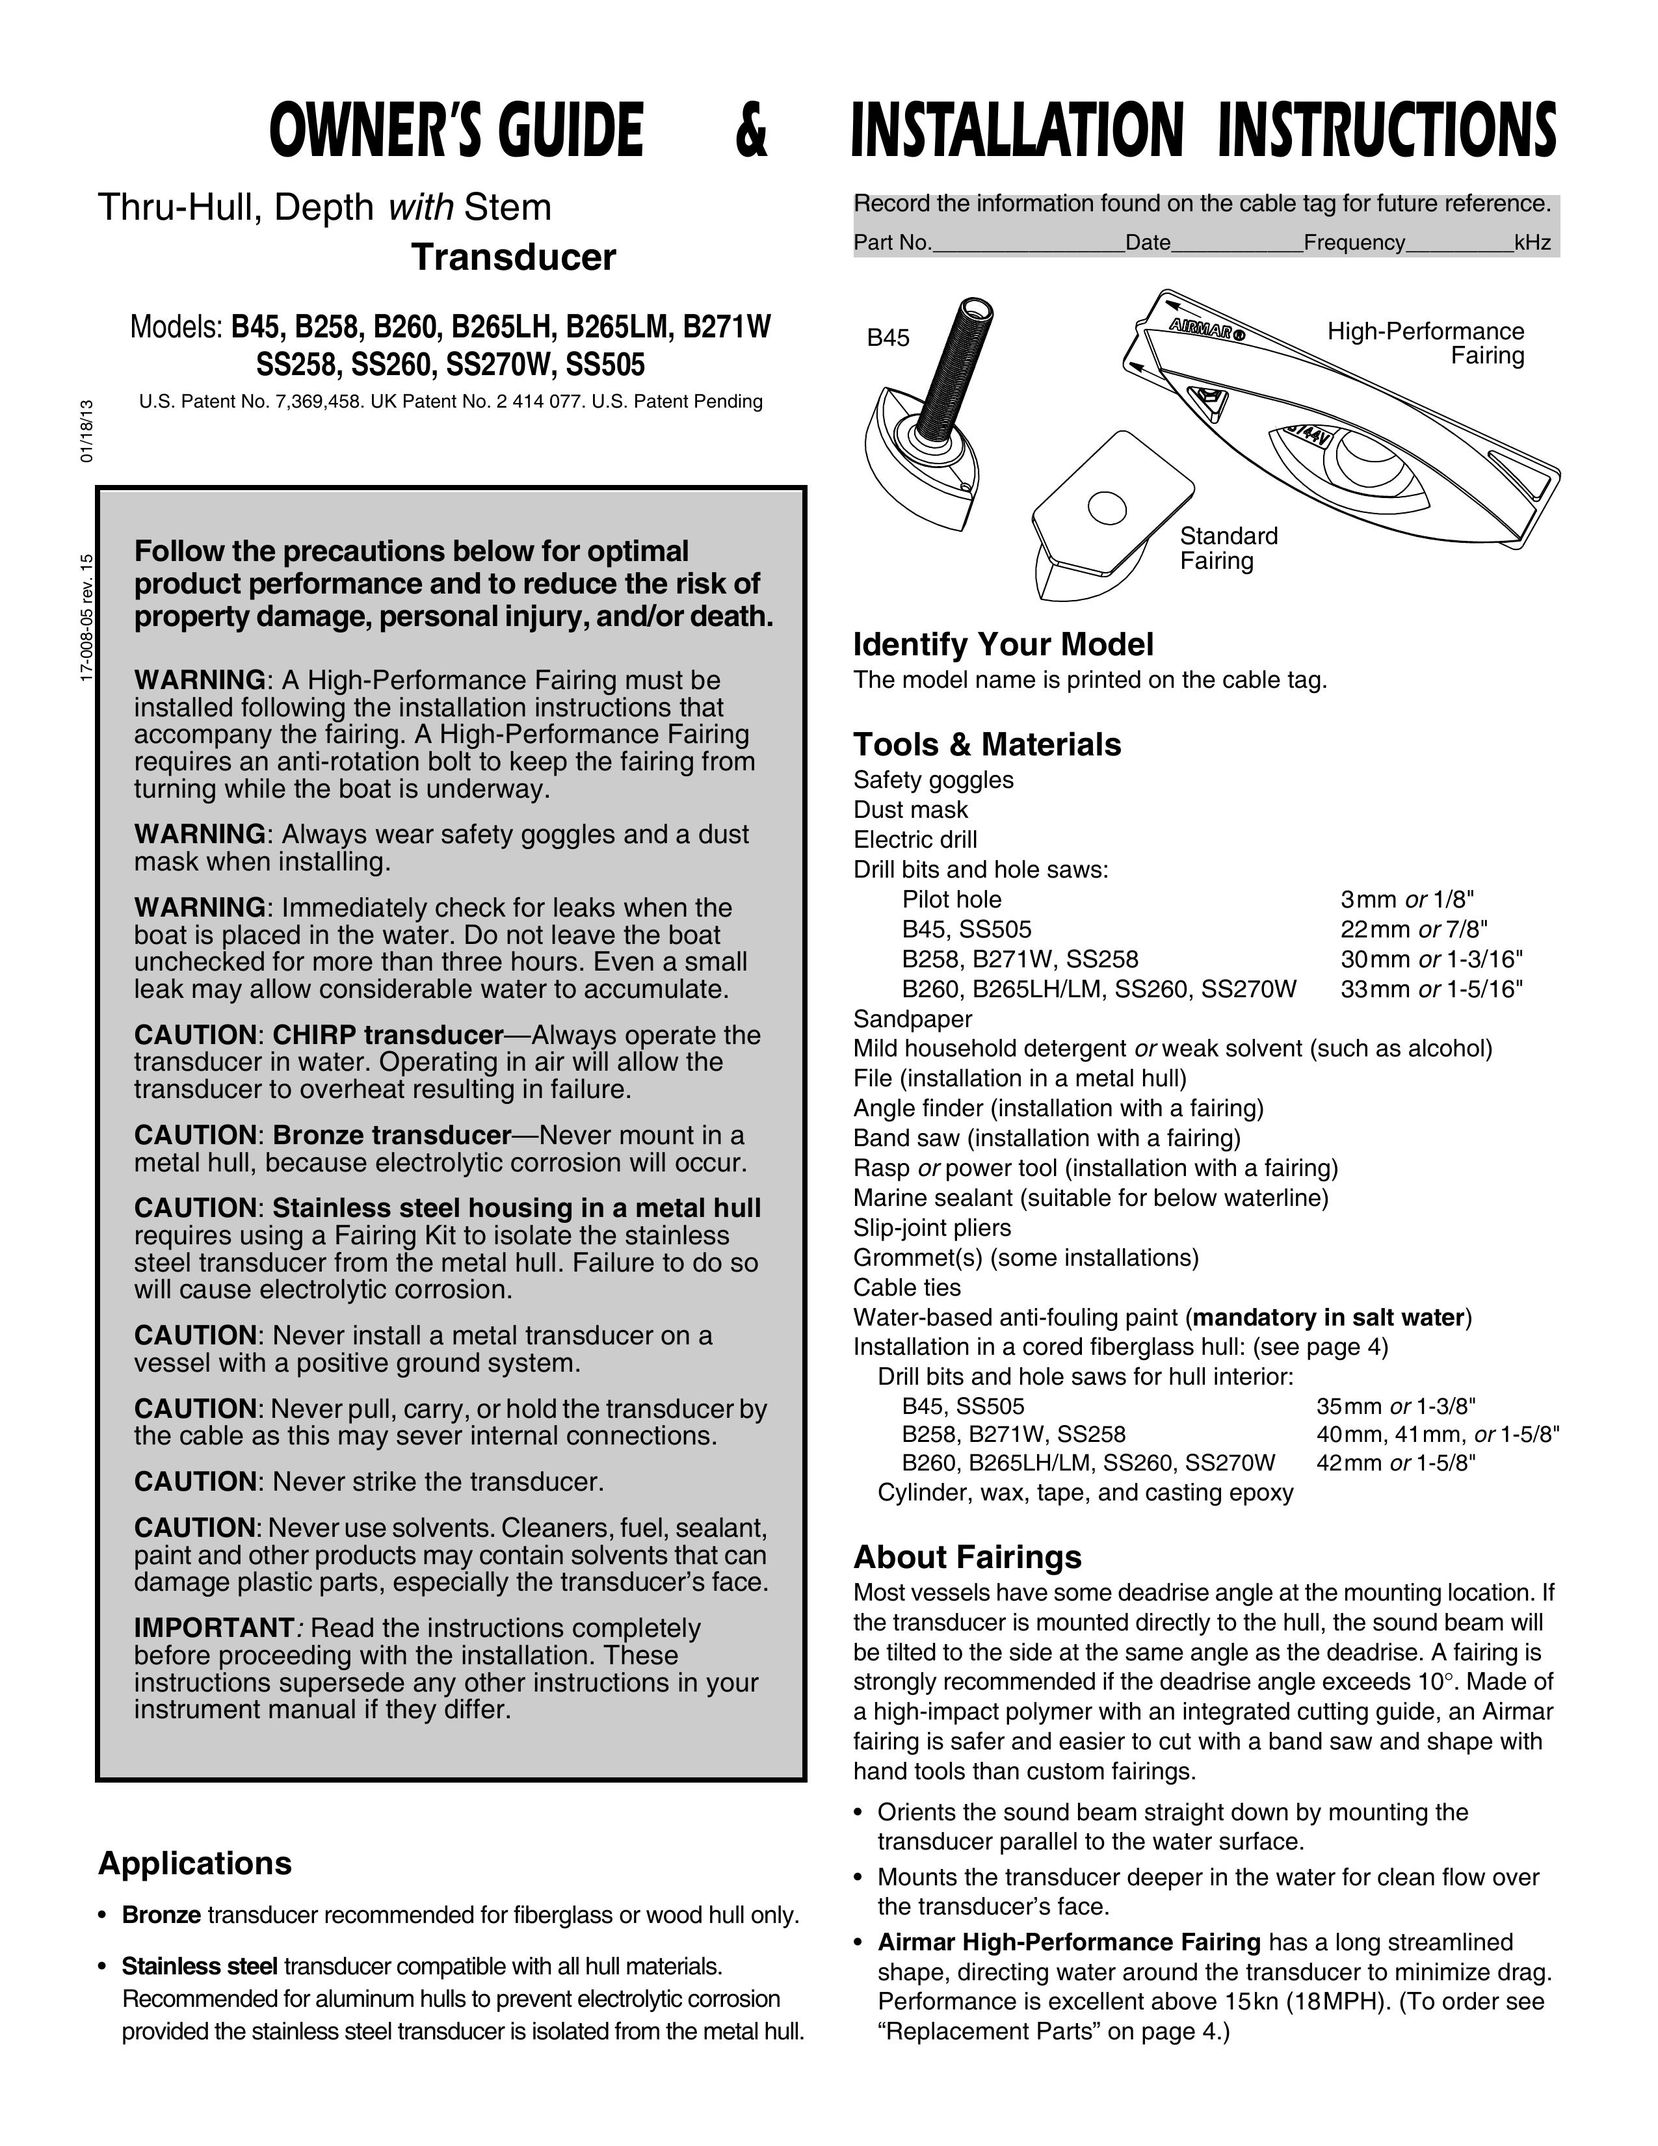 New Transducers B265LH Network Router User Manual